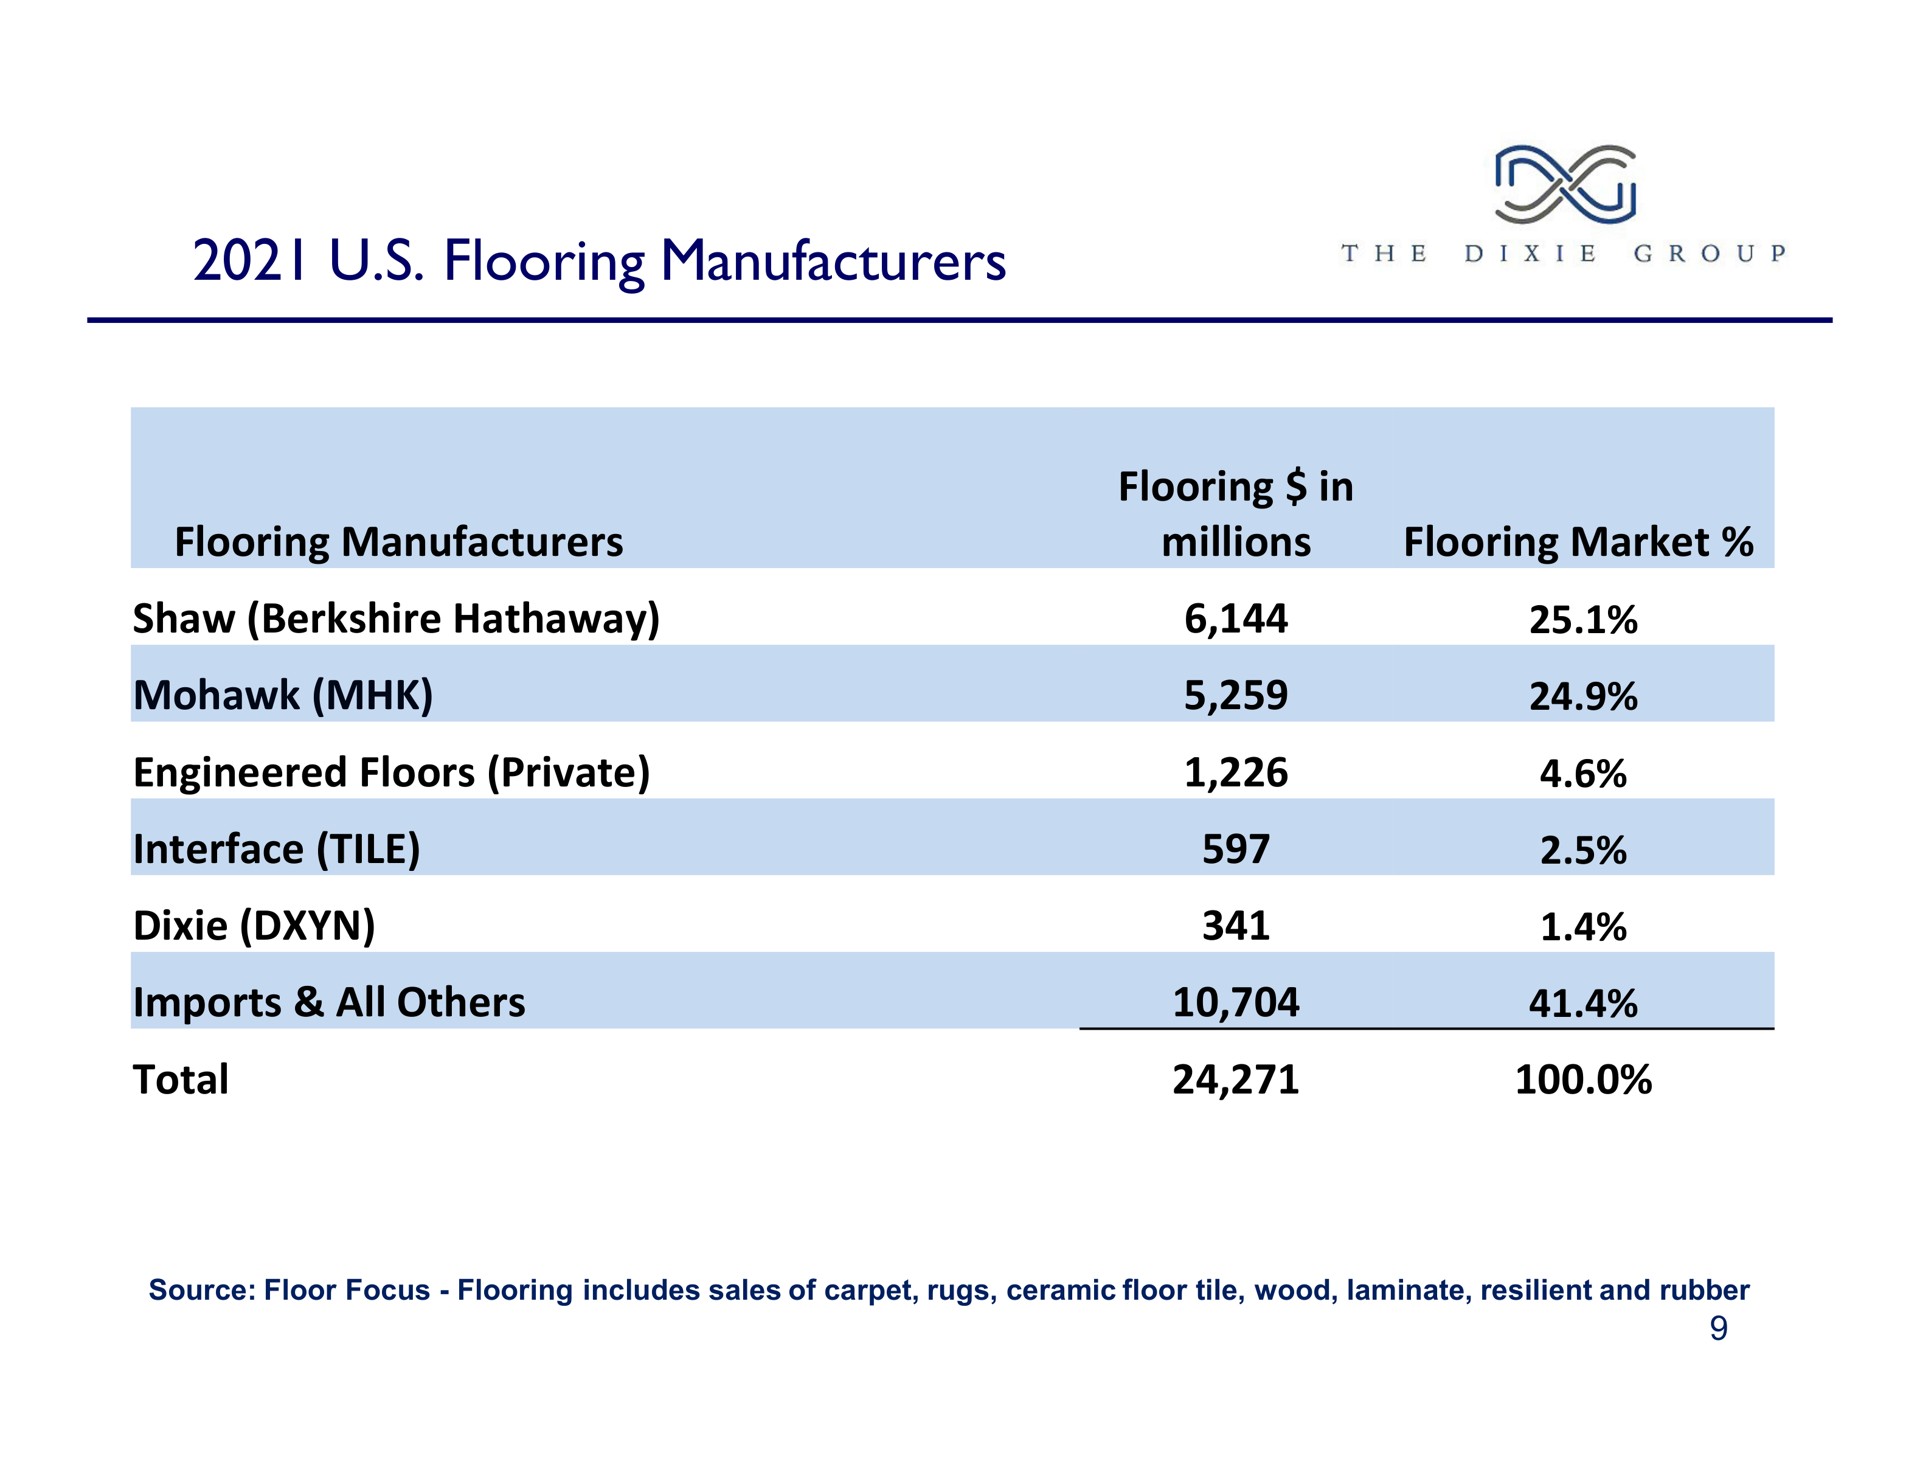 flooring manufacturers sees | The Dixie Group